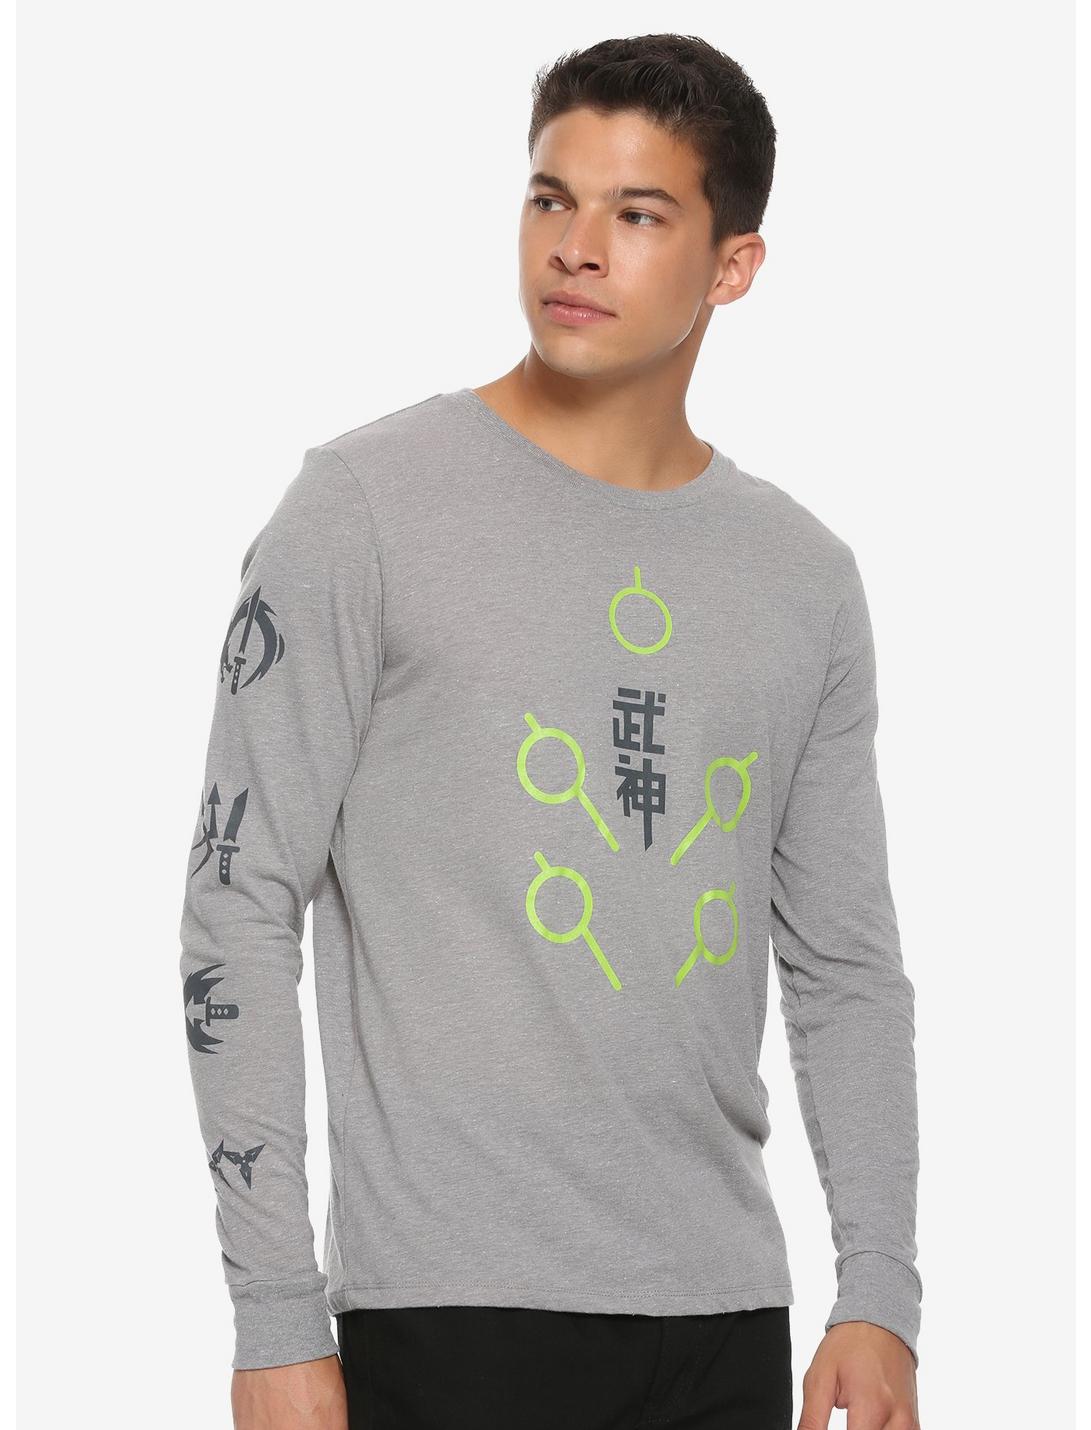 Our Universe Overwatch Genji Long-Sleeve T-Shirt, MULTI, hi-res